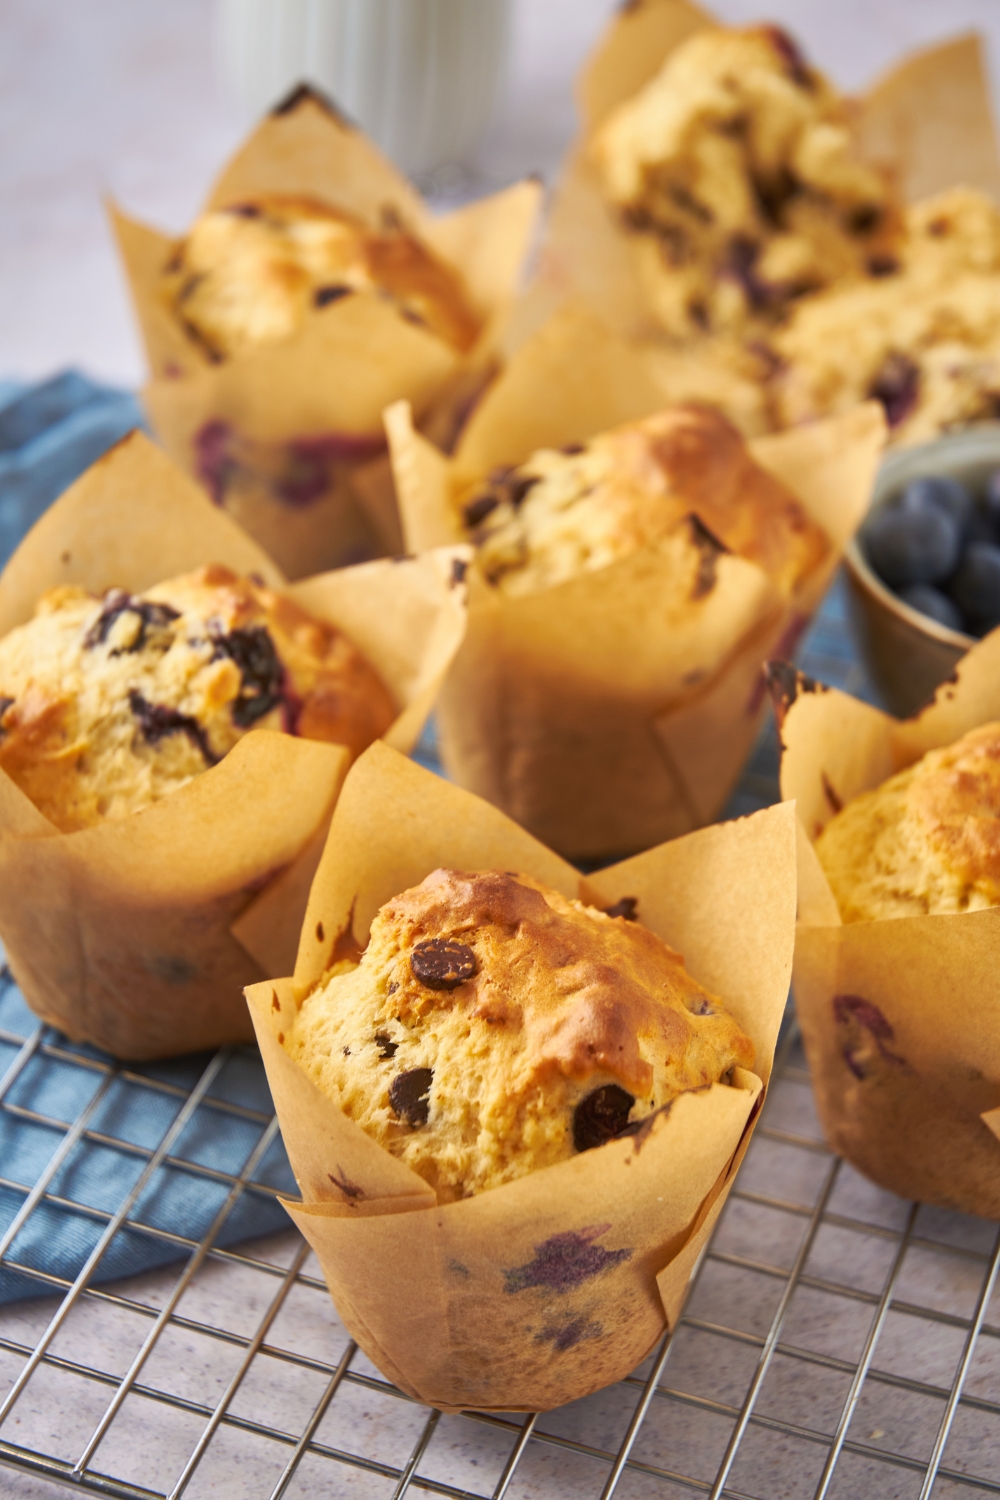 Chocolate chip blueberry muffins in muffin papers atop a wire rack.